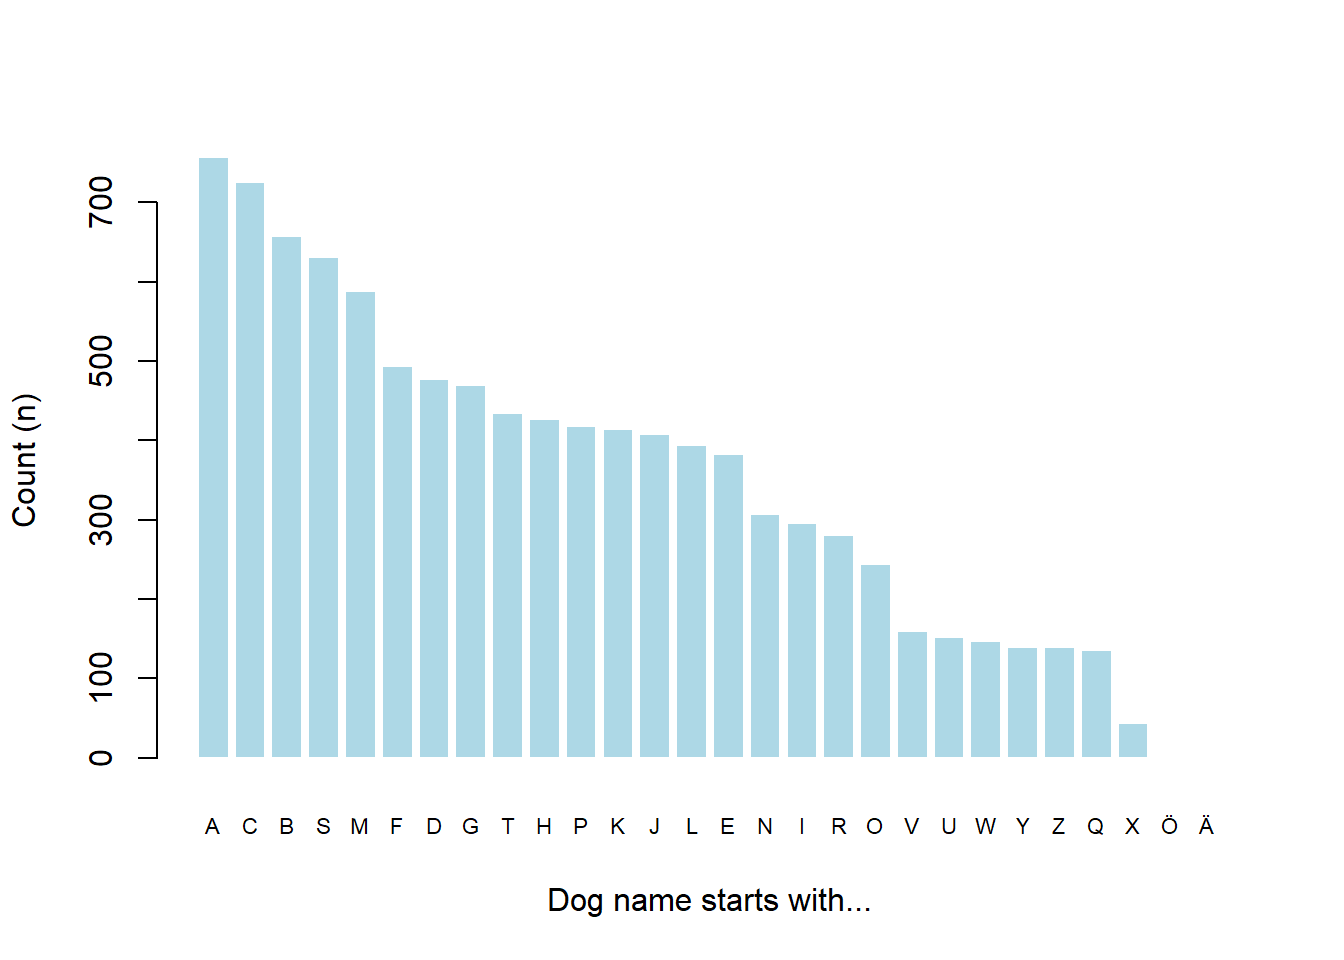 Number of dog names starting with a particular letter.